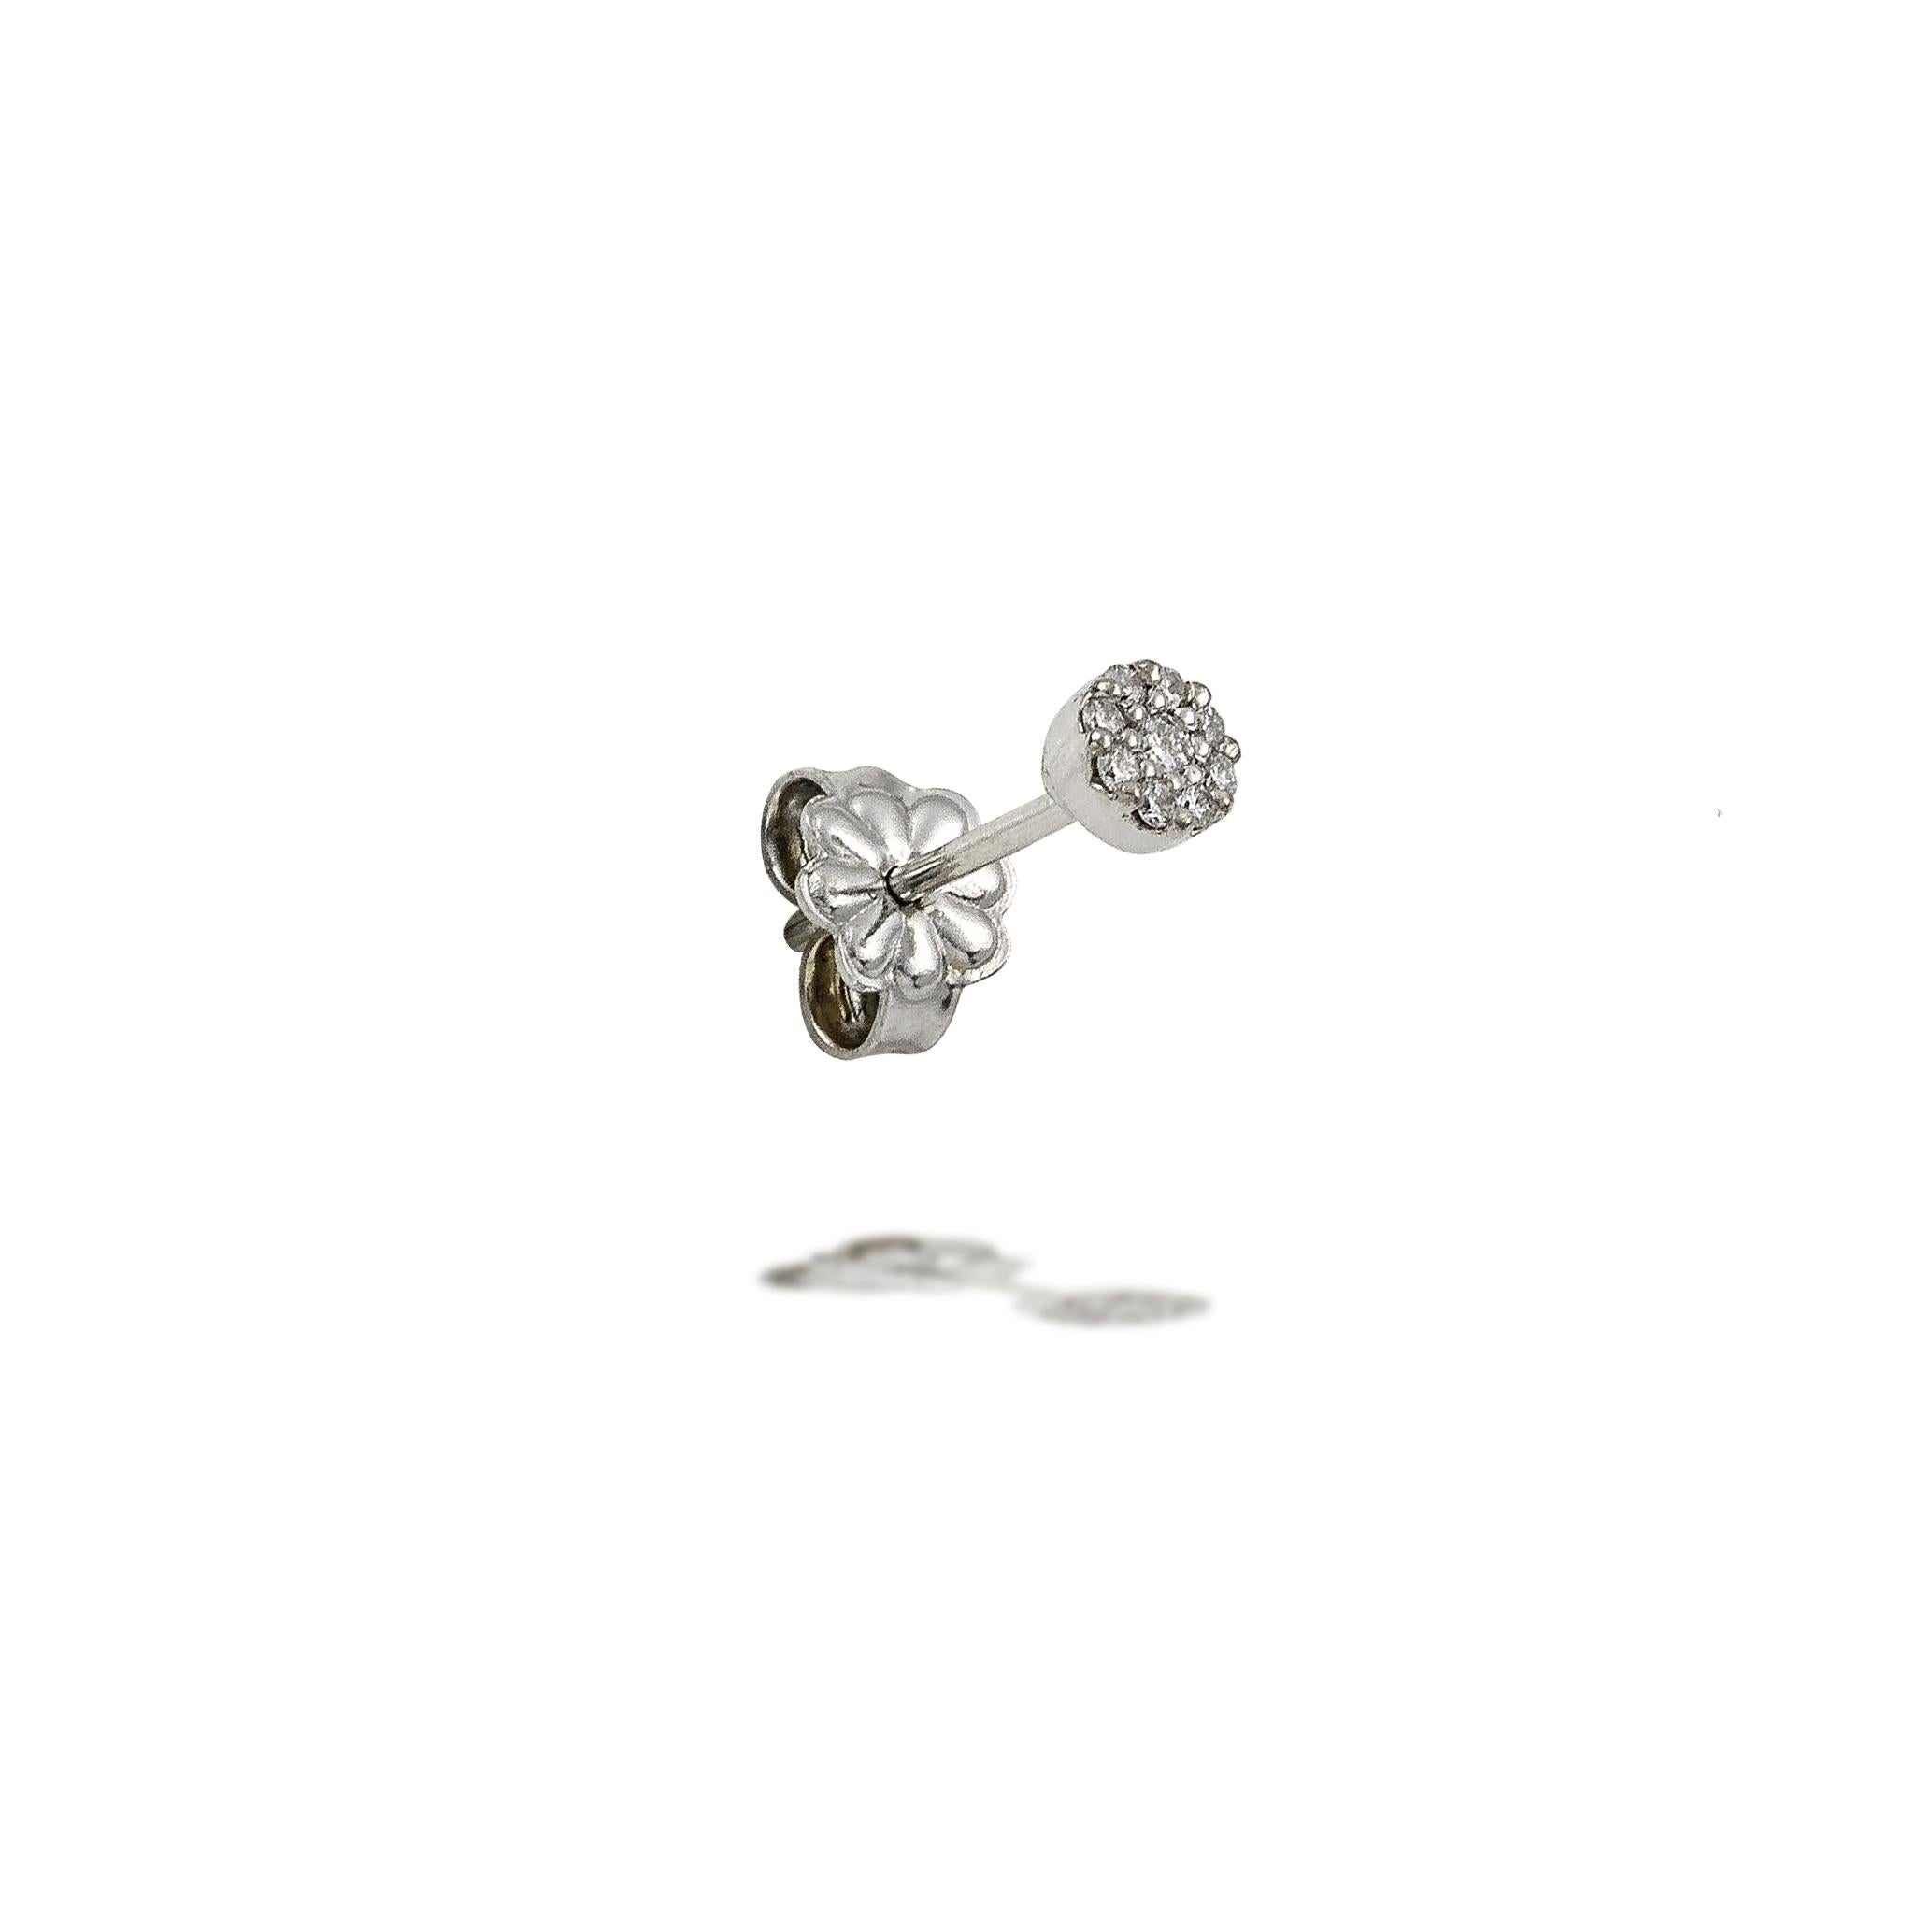 Recycled 14K White Gold

Diamonds Approx. 0.1 ct

Single Round Earring Stud in White Gold and Diamonds.

This collection combines the simplicity of the single piece with the opulence of diamonds.

All jewels in the Essentials – Mix & Match